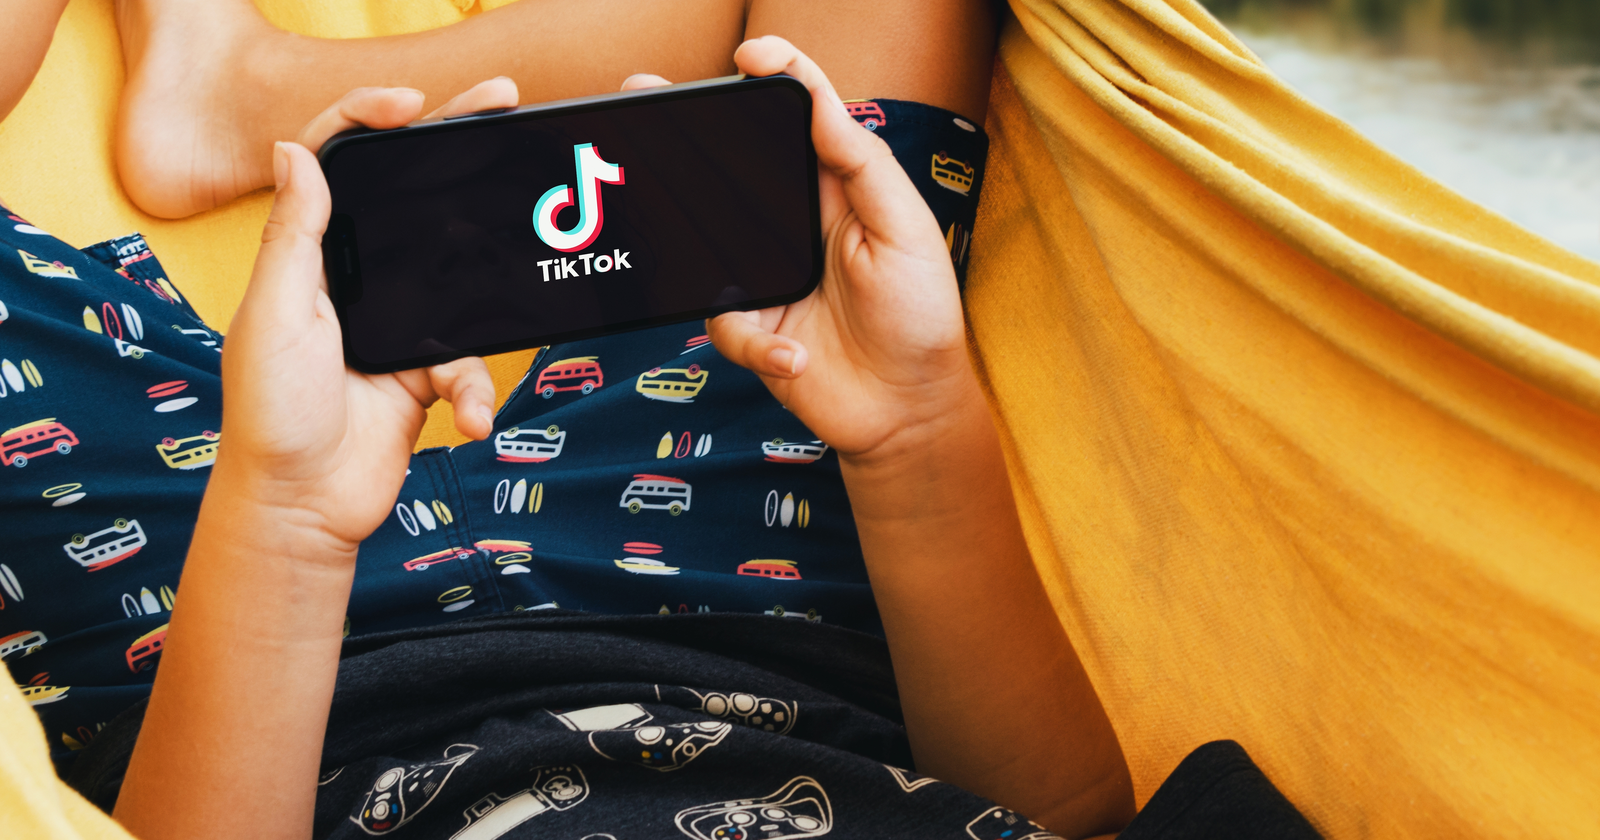 Could TikTok Be A Search Engine? For Many Users, It Already Is via @sejournal, @MattGSouthern